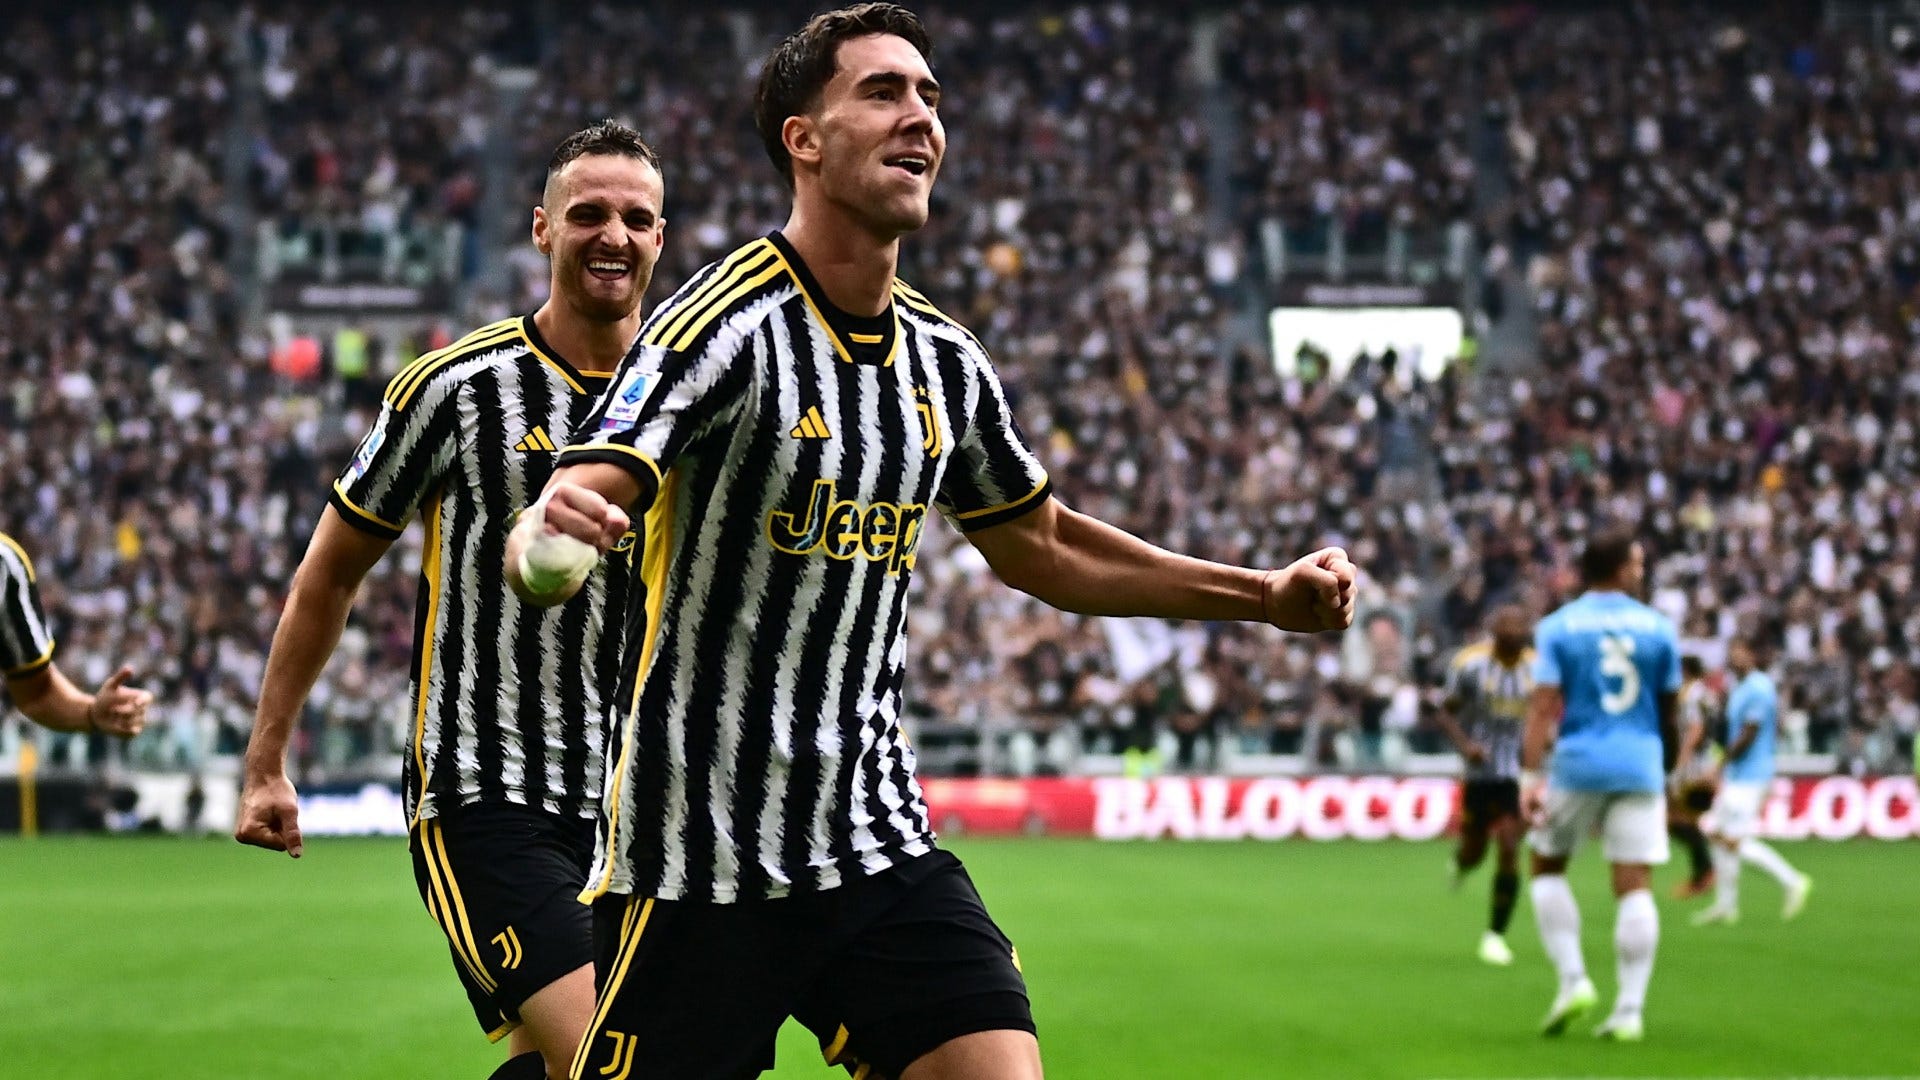 Sassuolo vs Juventus Live stream, TV channel, kick-off time and where to watch Goal US